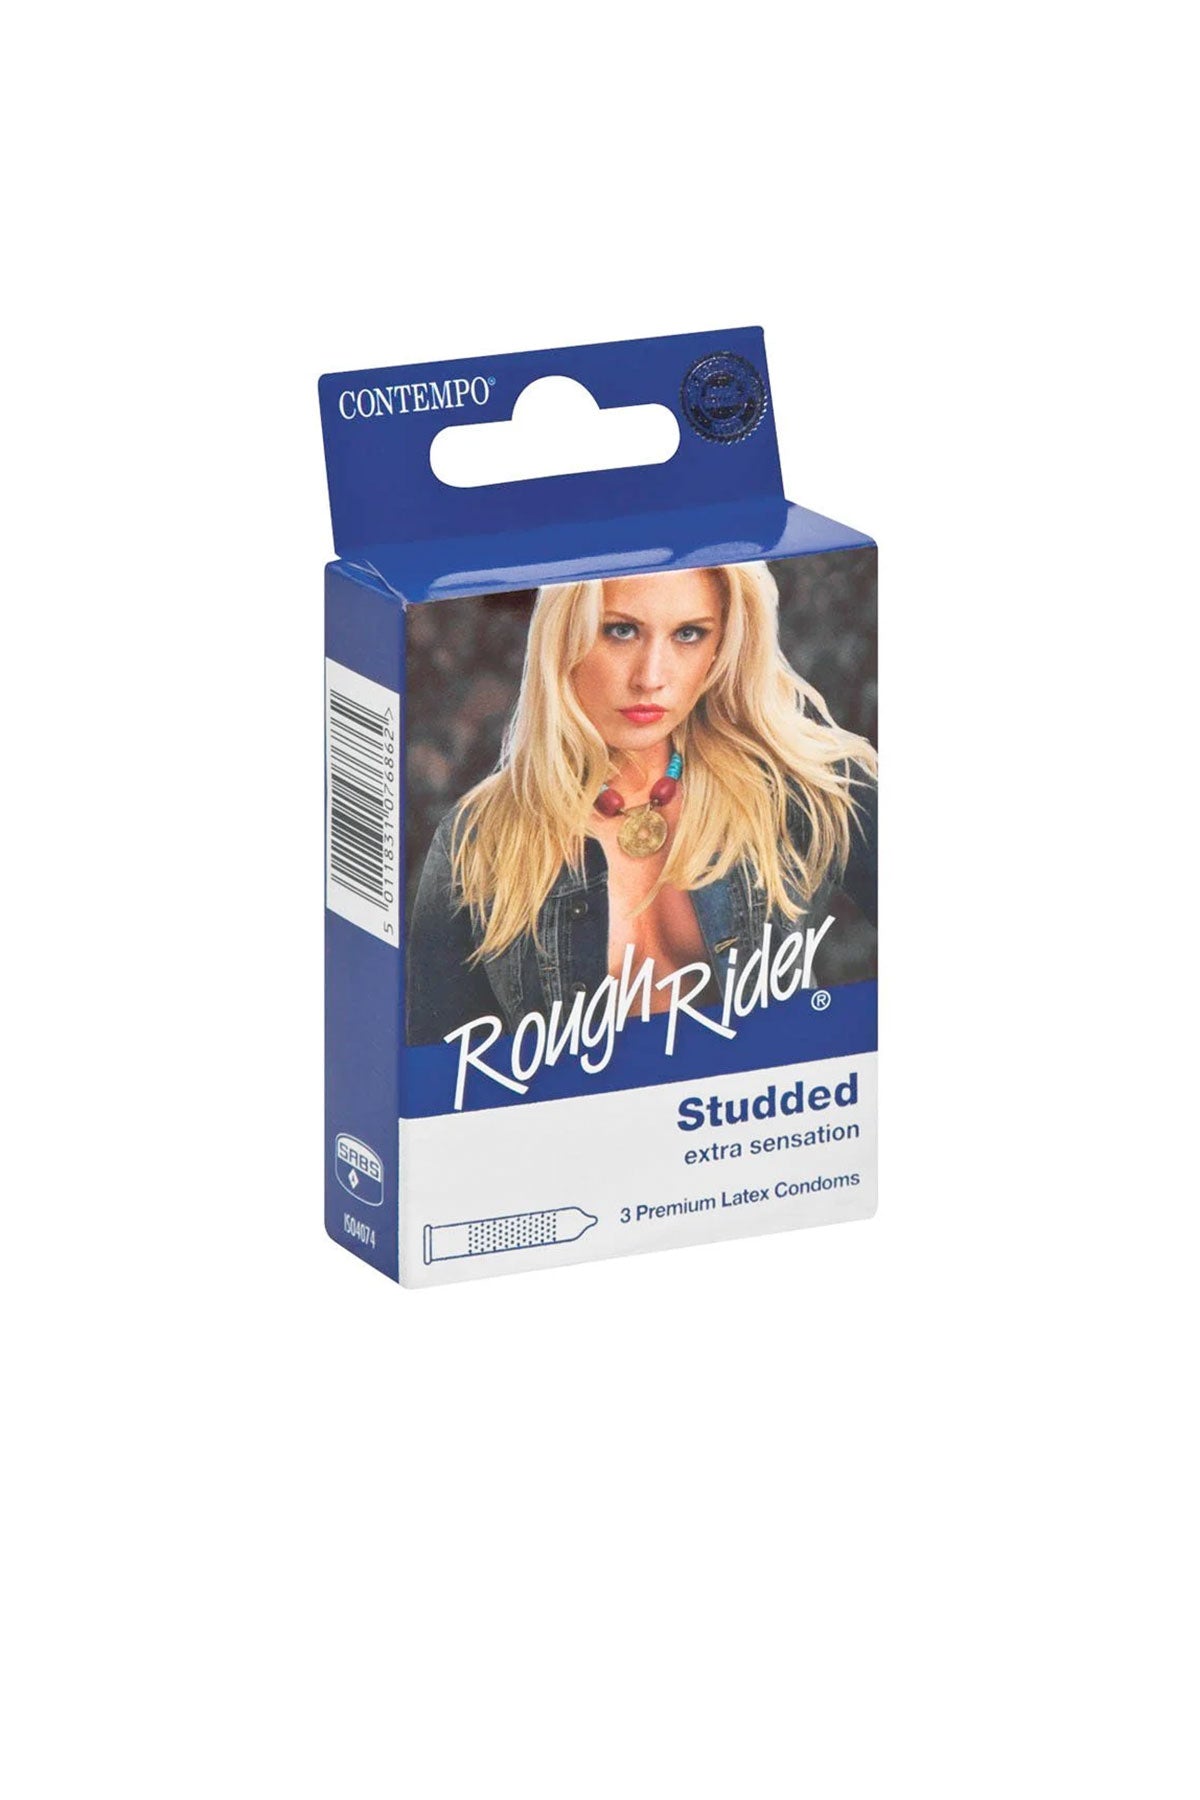 Rough Rider Studded Condoms by Contempo